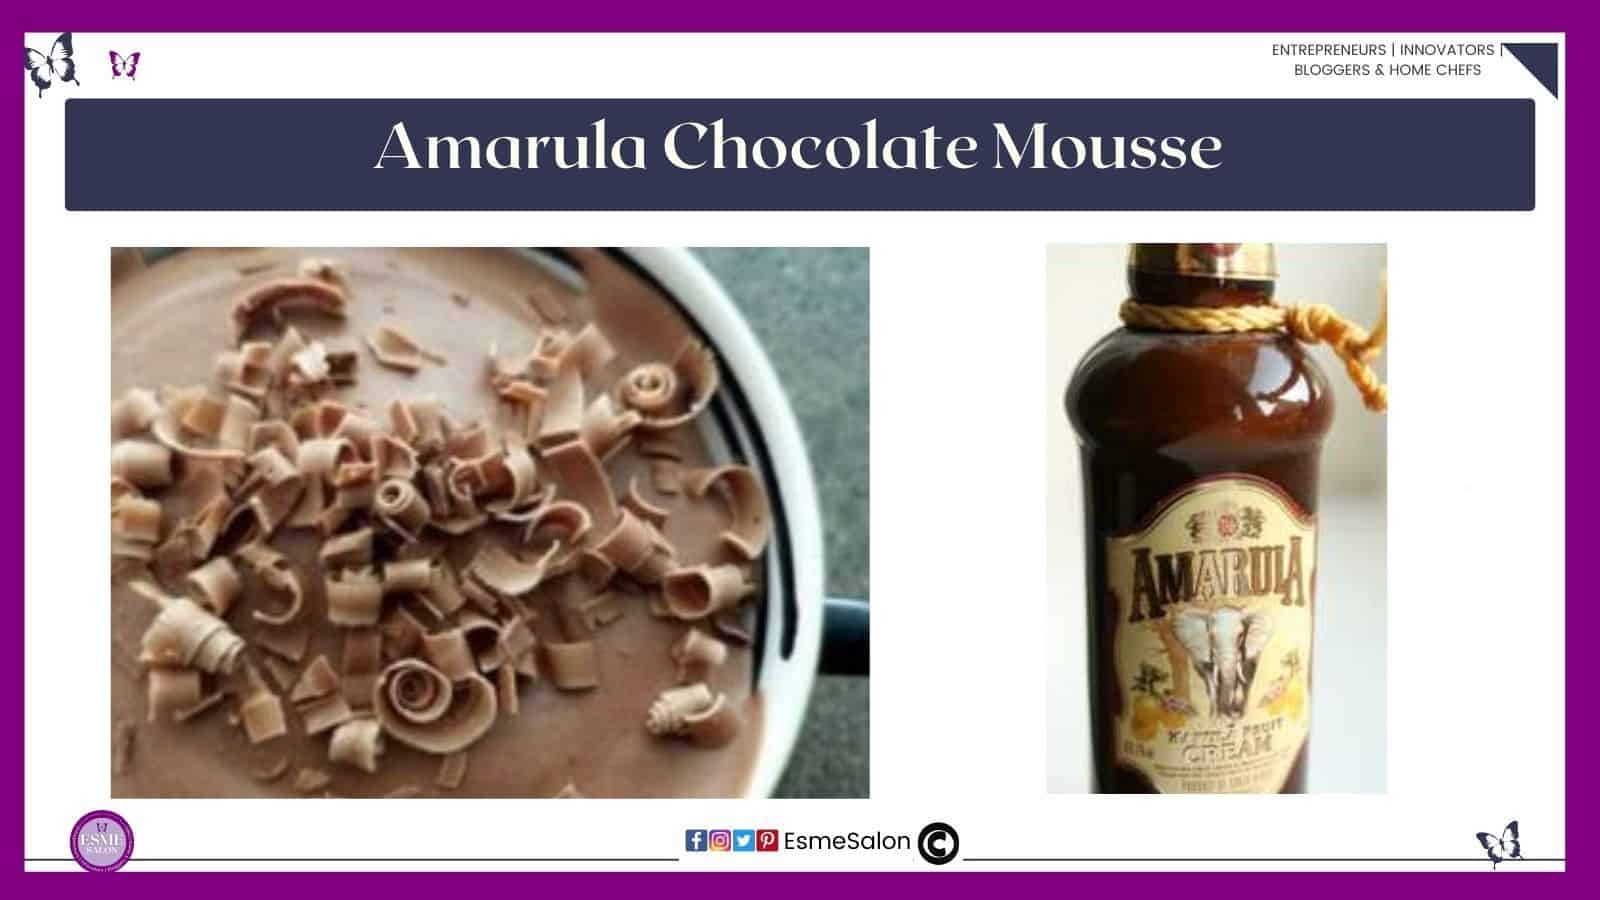 an image of an Amarula Chocolate Mousse as a single serving, with a bottle Amarula on the side